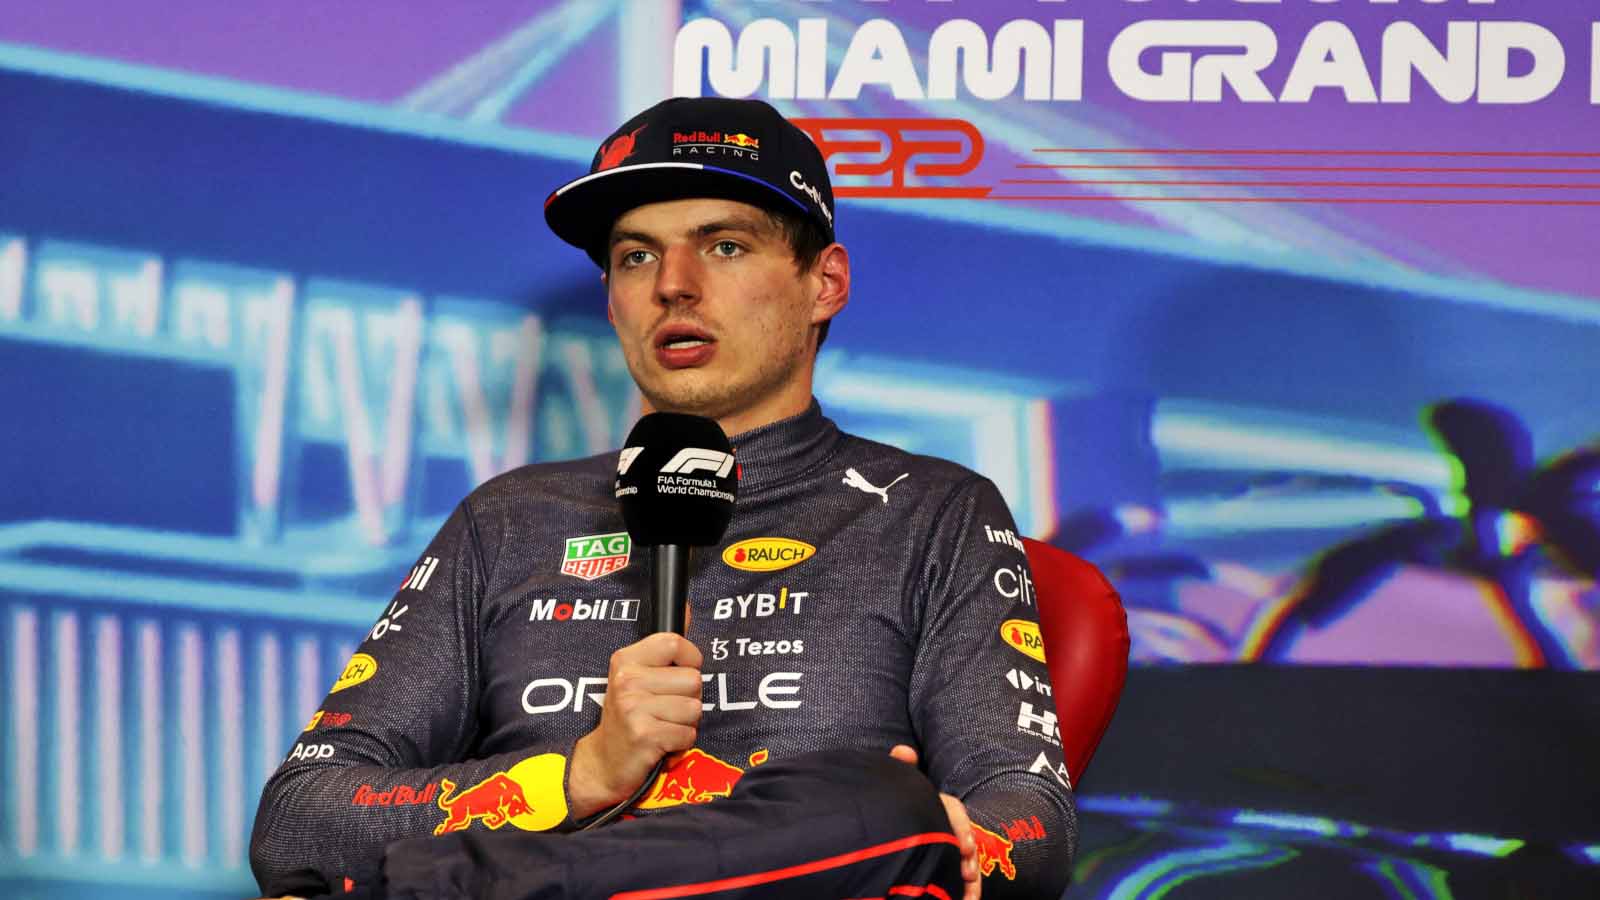 Max Verstappen in the press conference. Miami May 2022.